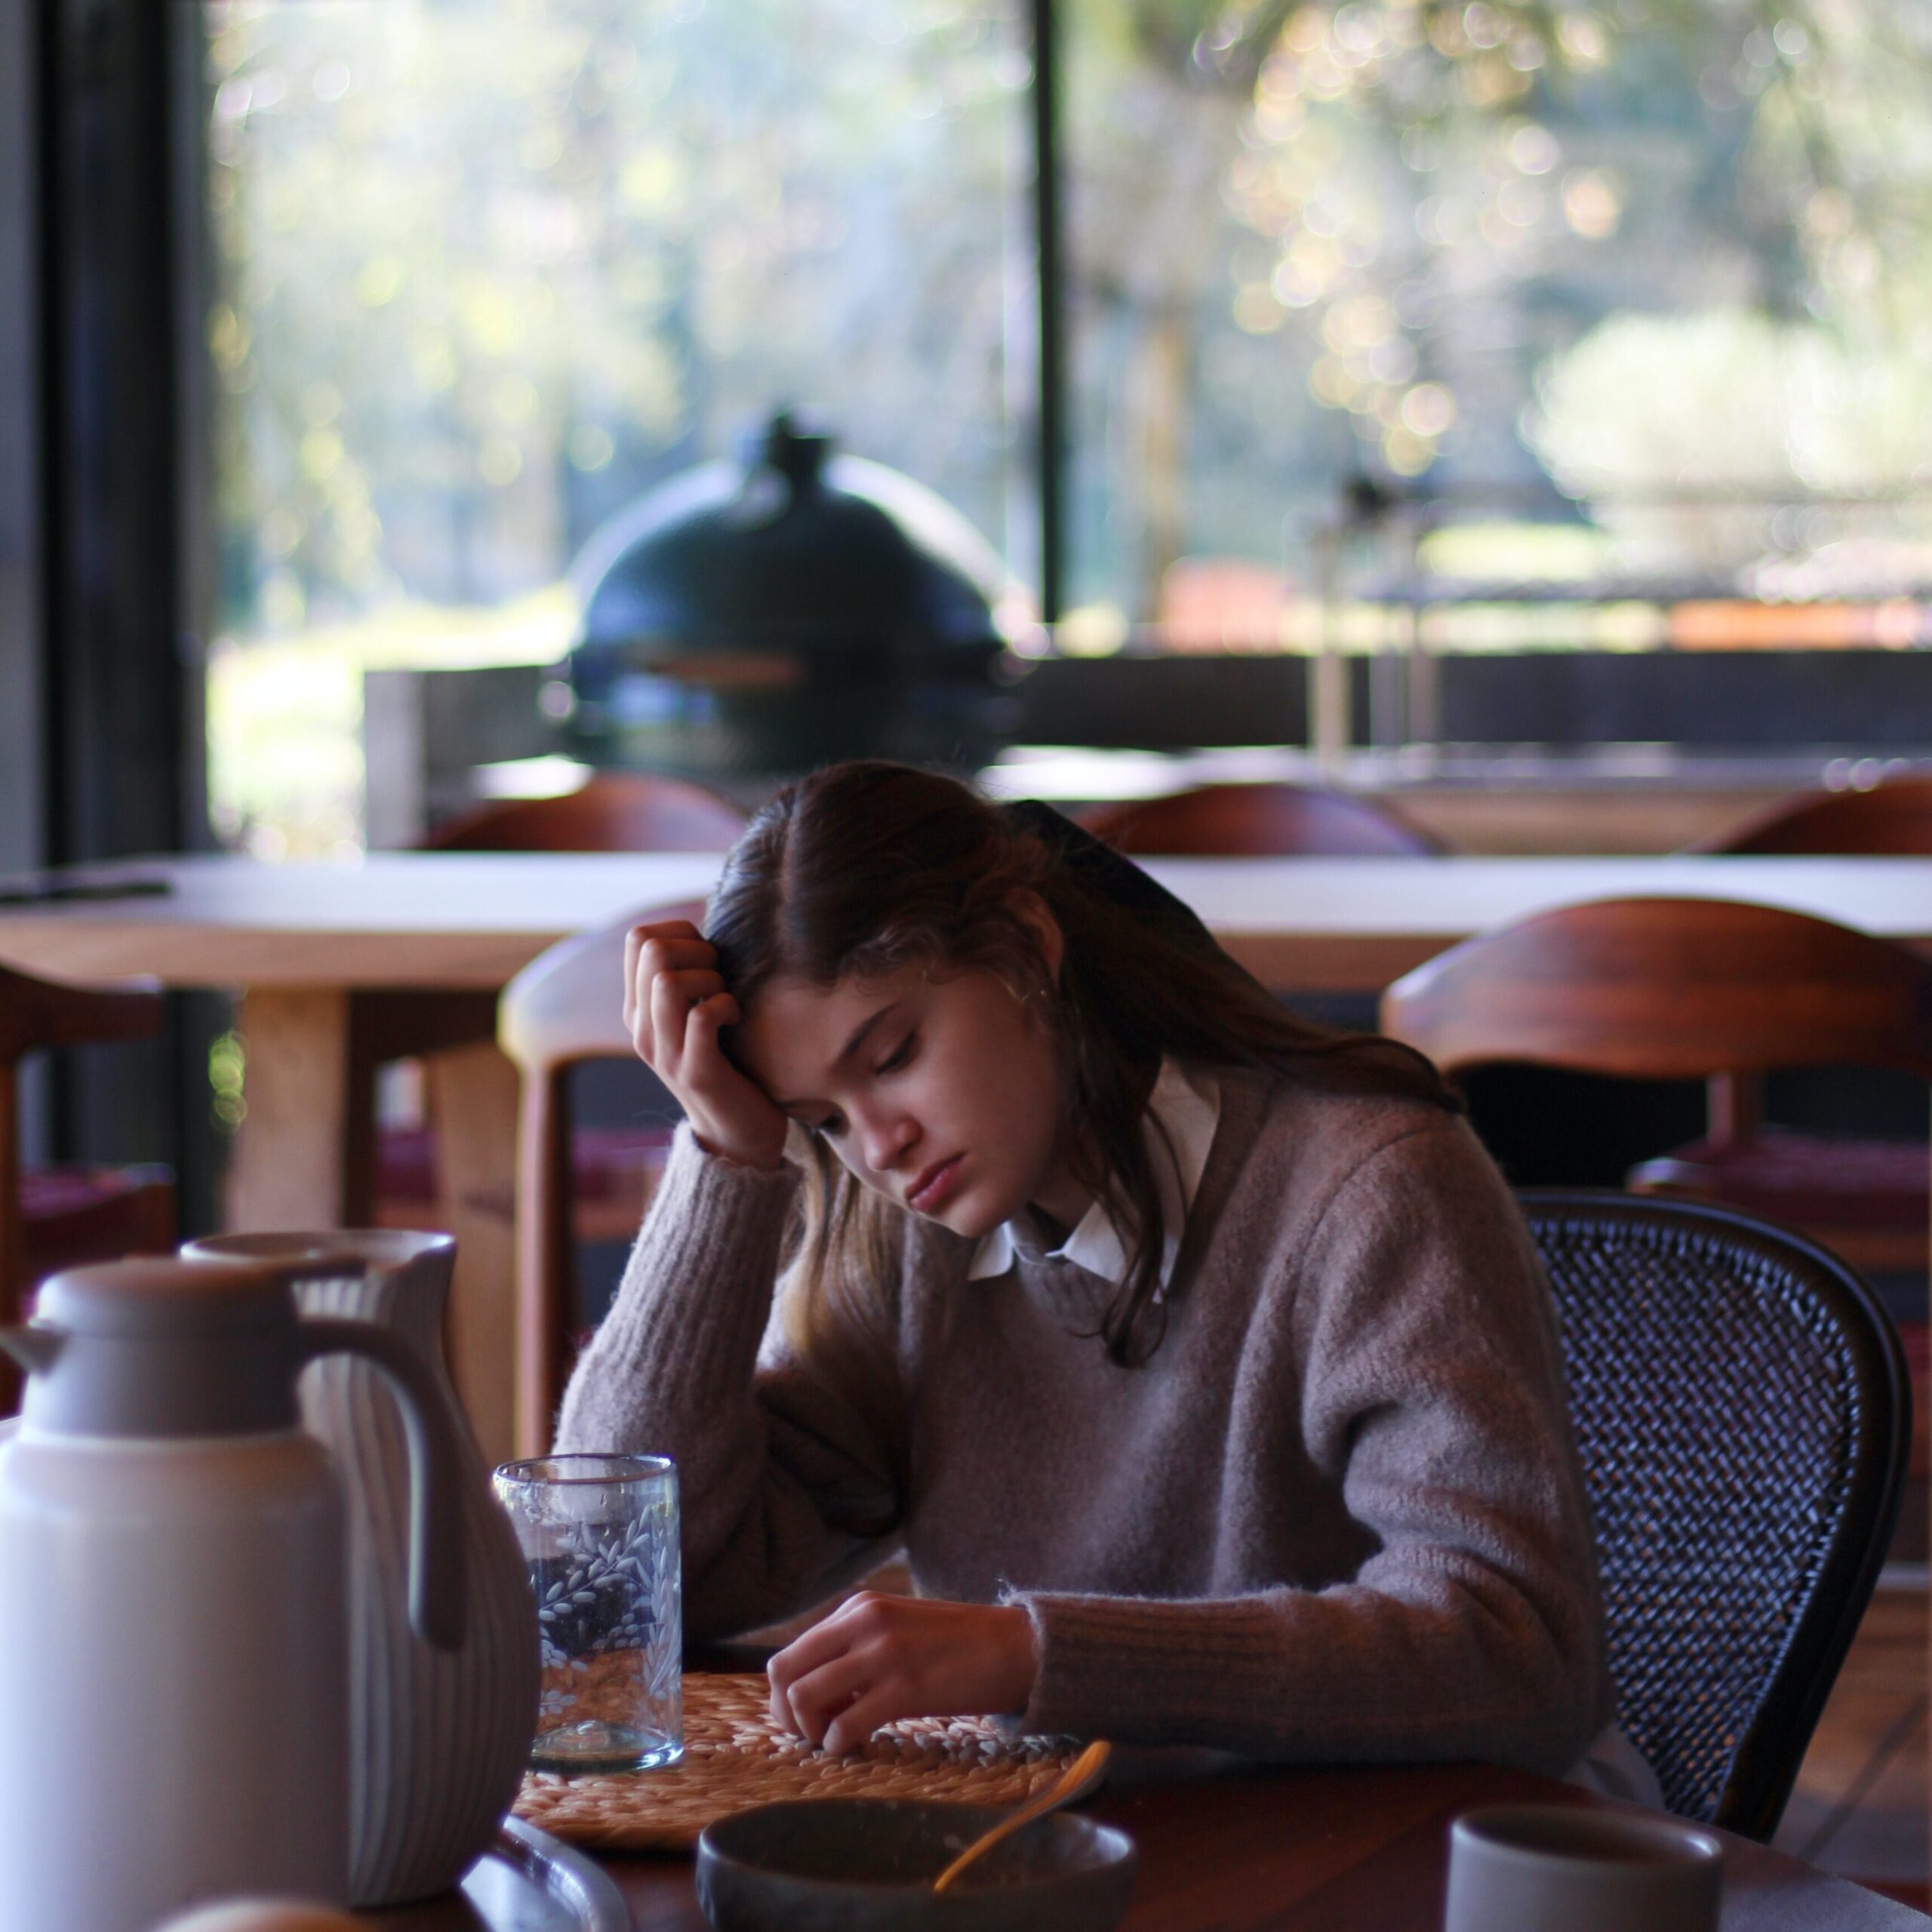 Woman pondering while sitting at a table in a cafe. Photo by Lucia Macedo on Unsplash